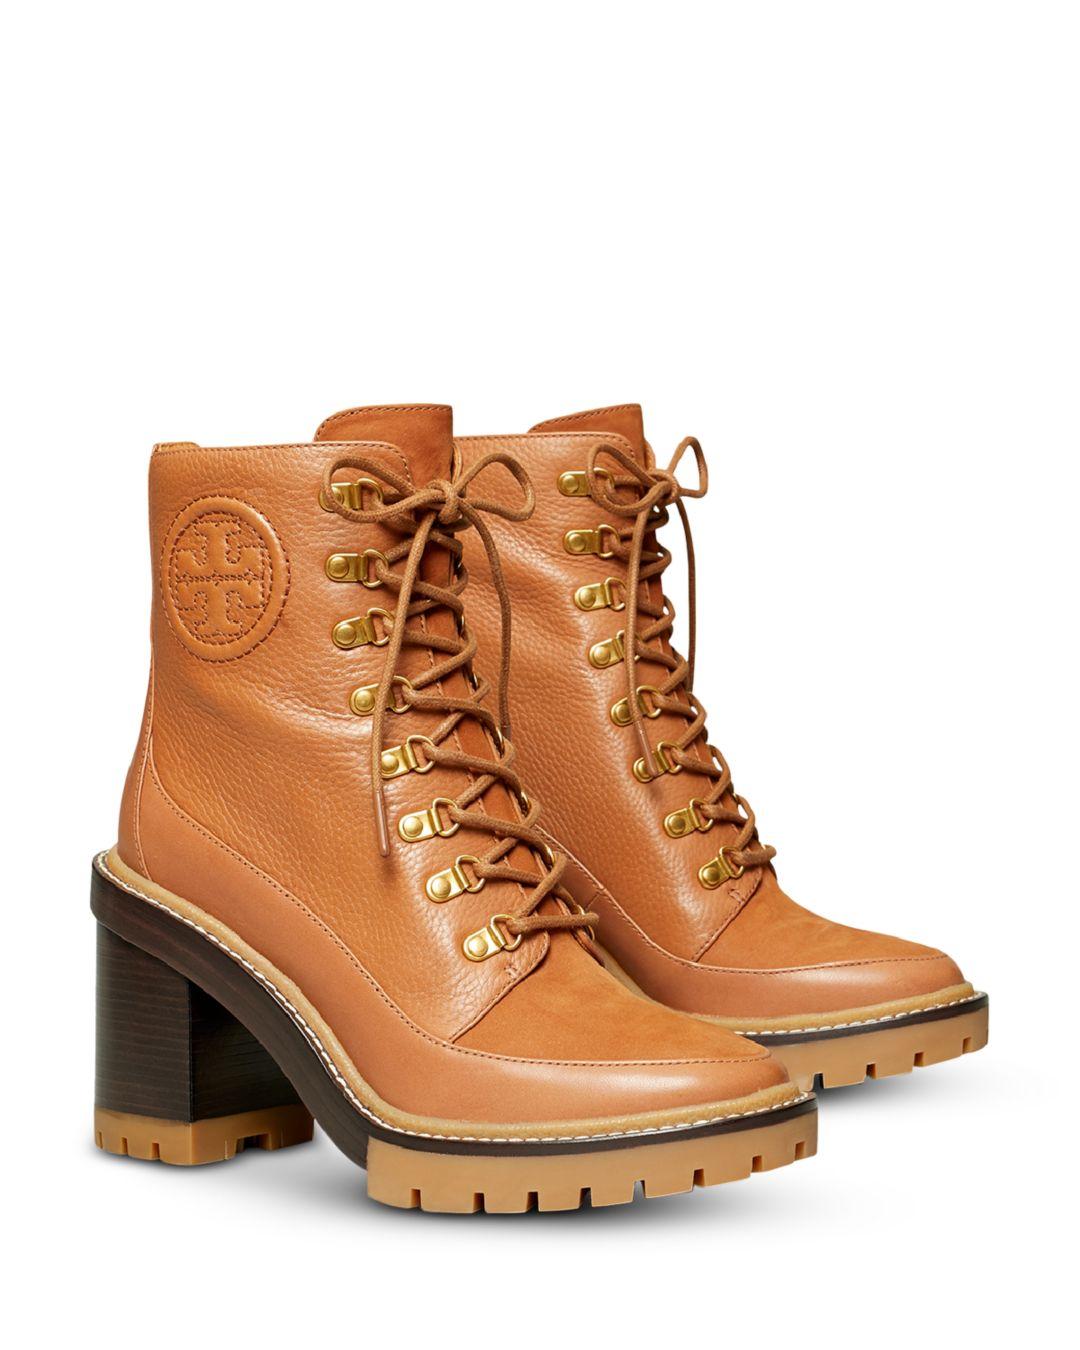 Tory Burch Miller Mixed-materials Lug Sole Boot in Brown | Lyst